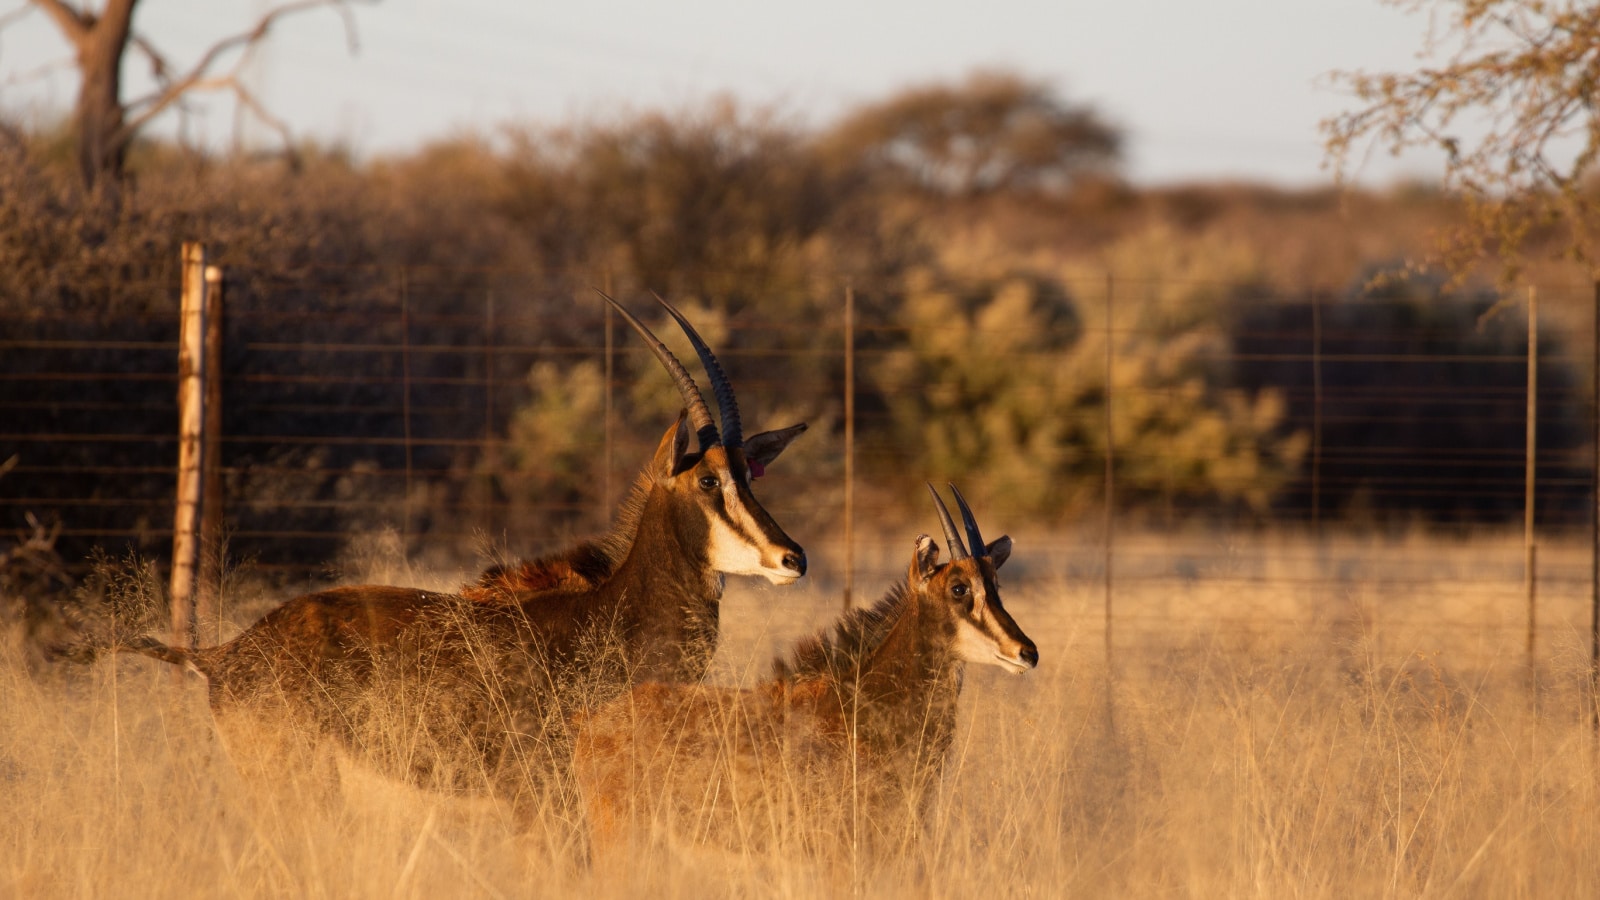 Sable antelope on a game farm, South Africa